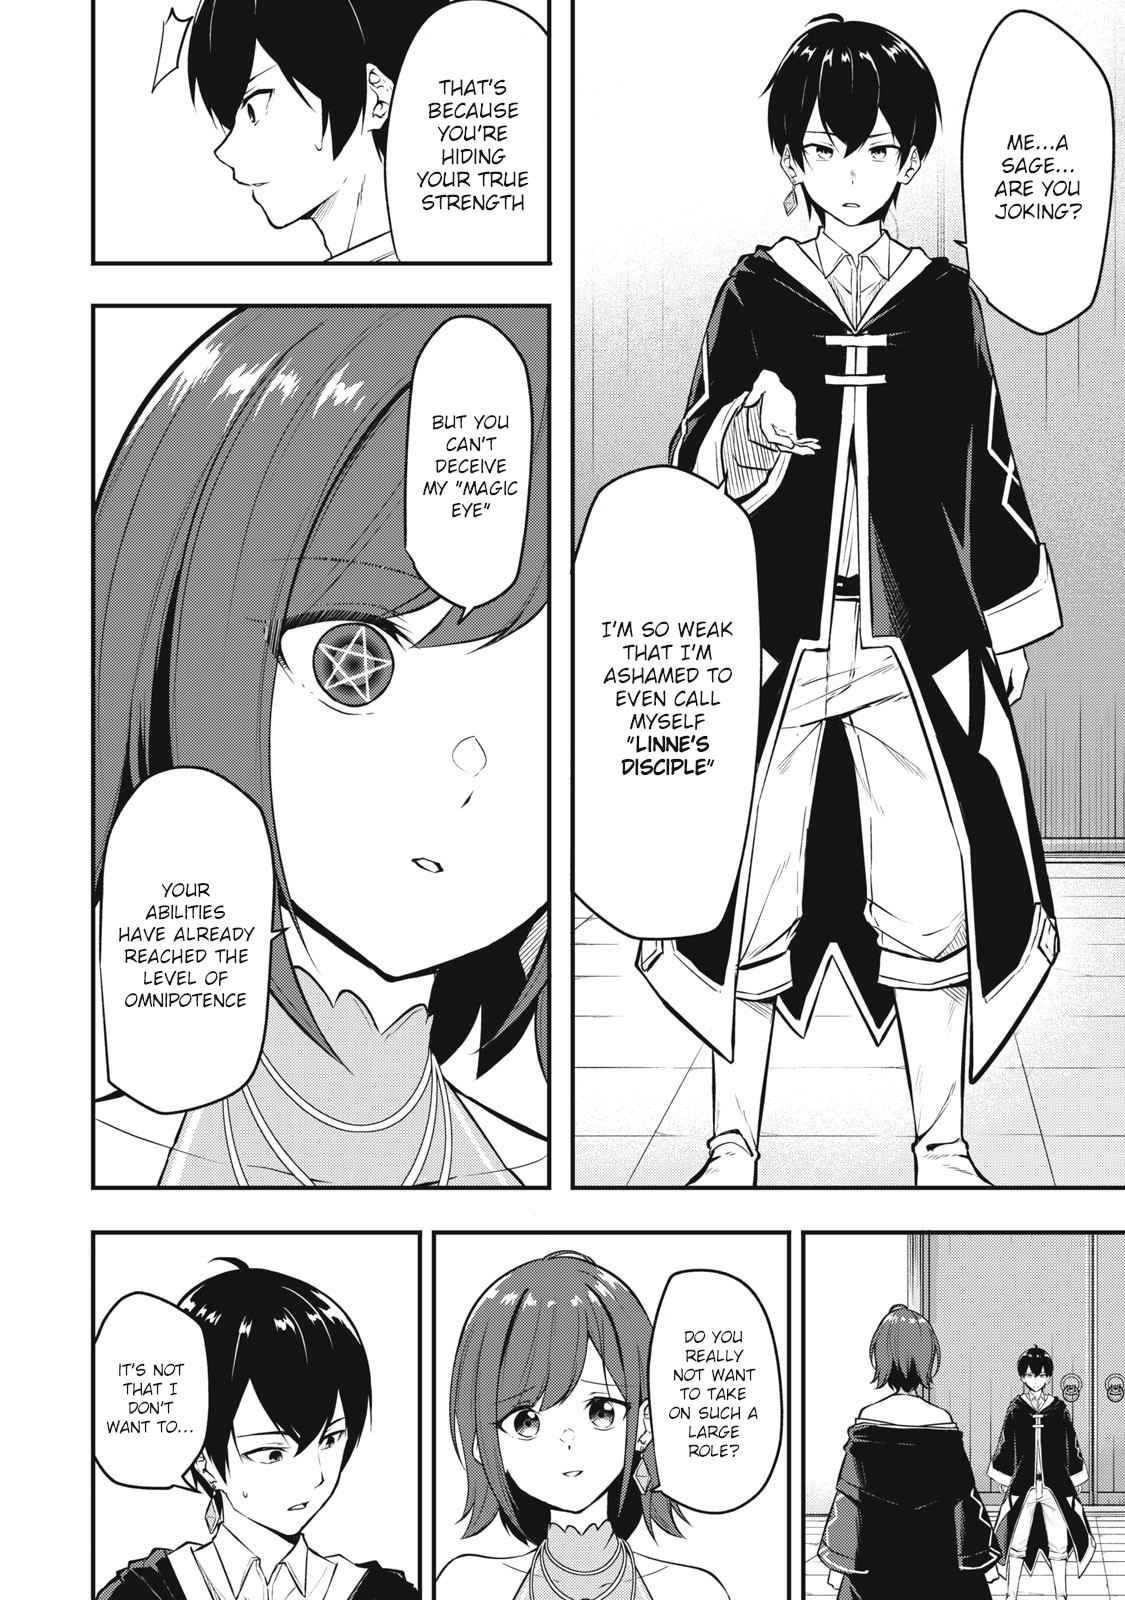 The Last Sage of the Imperial Sword Academy Chapter 1